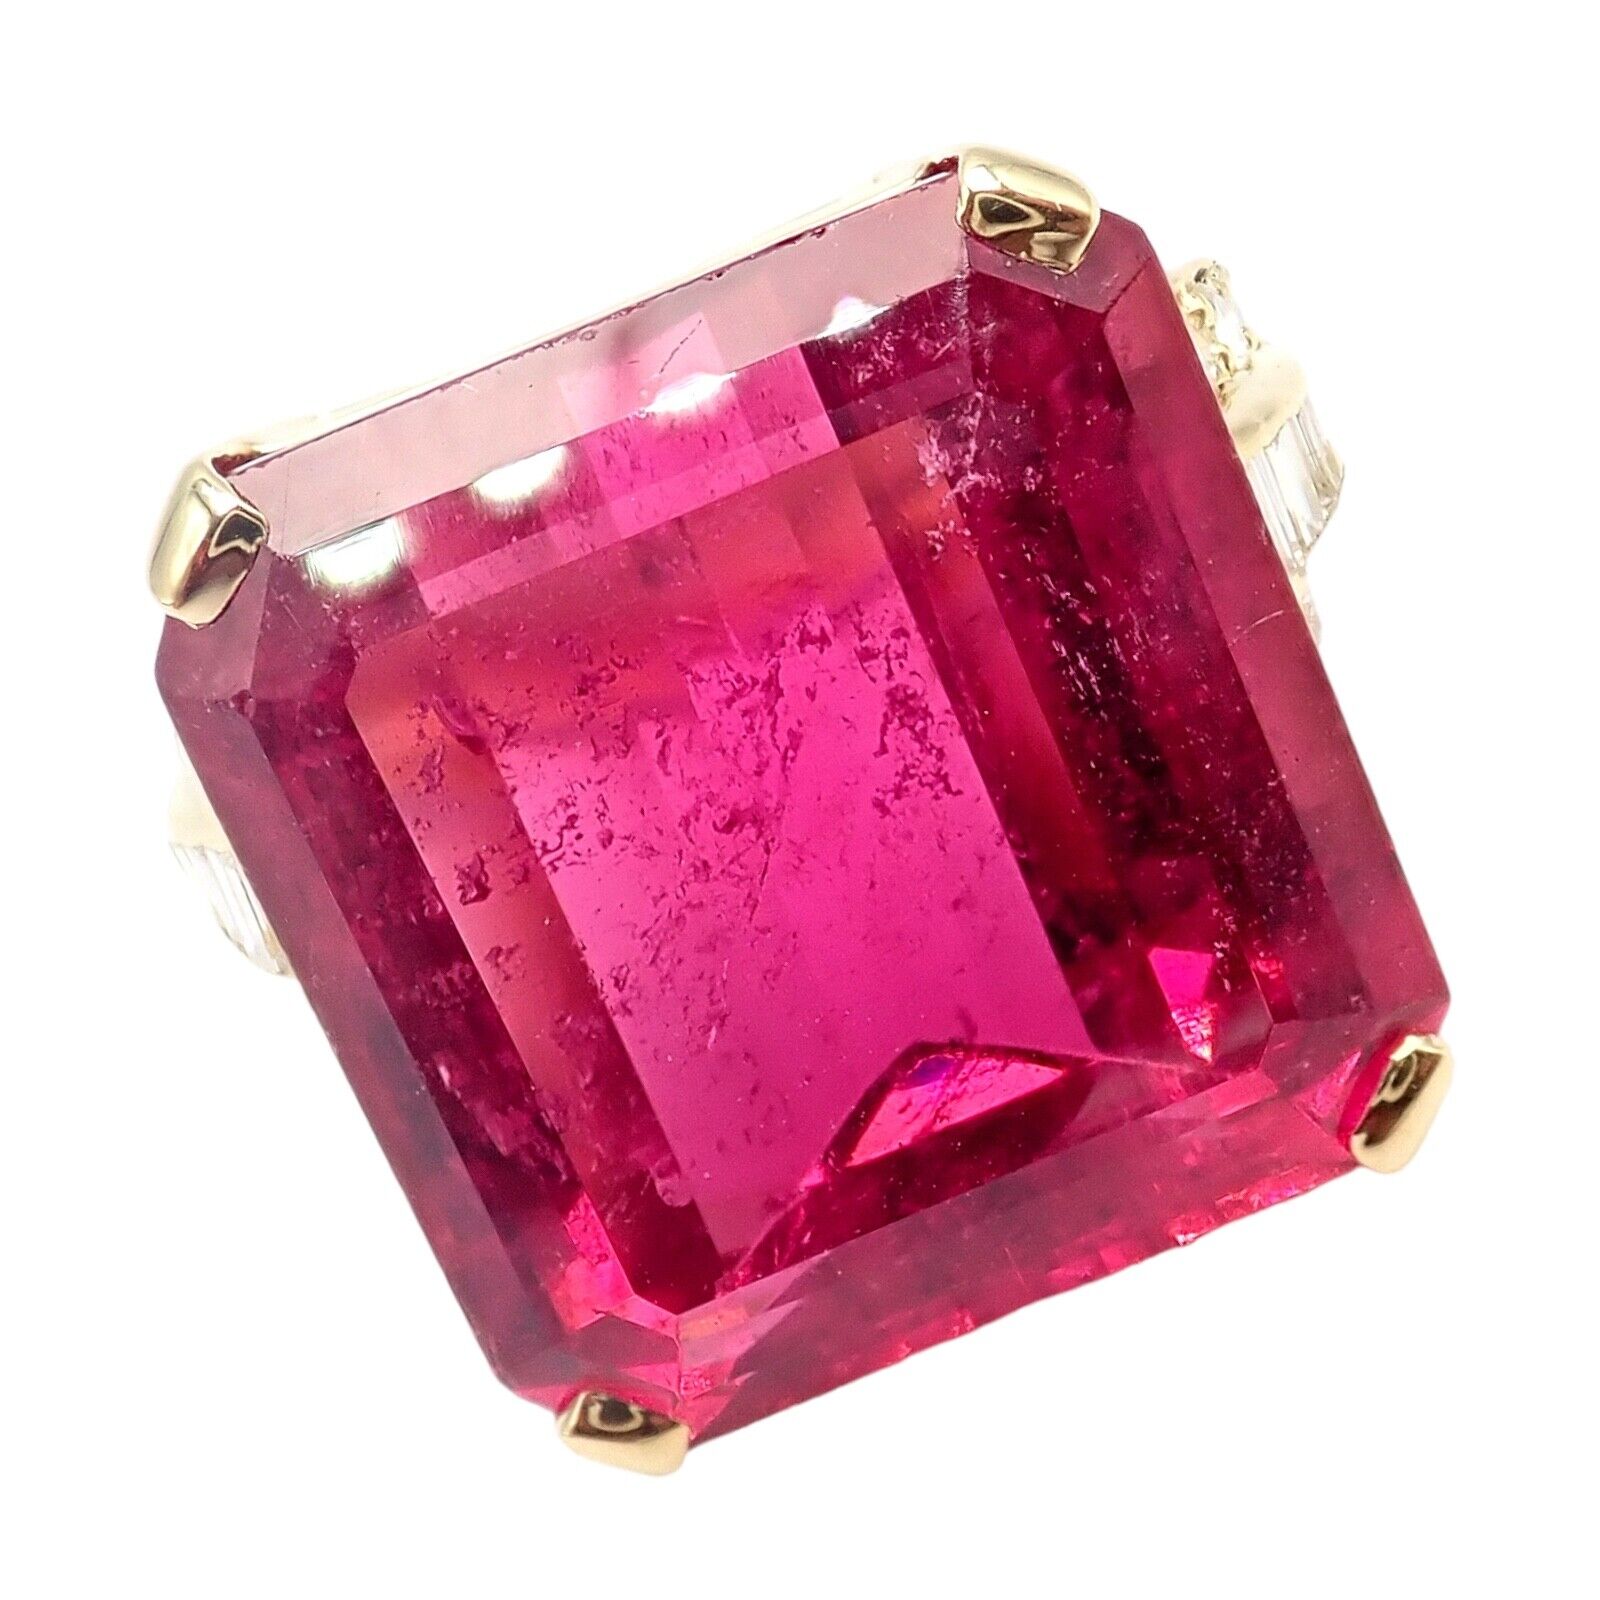 H. Stern Jewelry & Watches:Fine Jewelry:Rings Authentic! H. Stern 18k Yellow Gold Diamond Large Pink Tourmaline Statement Ring